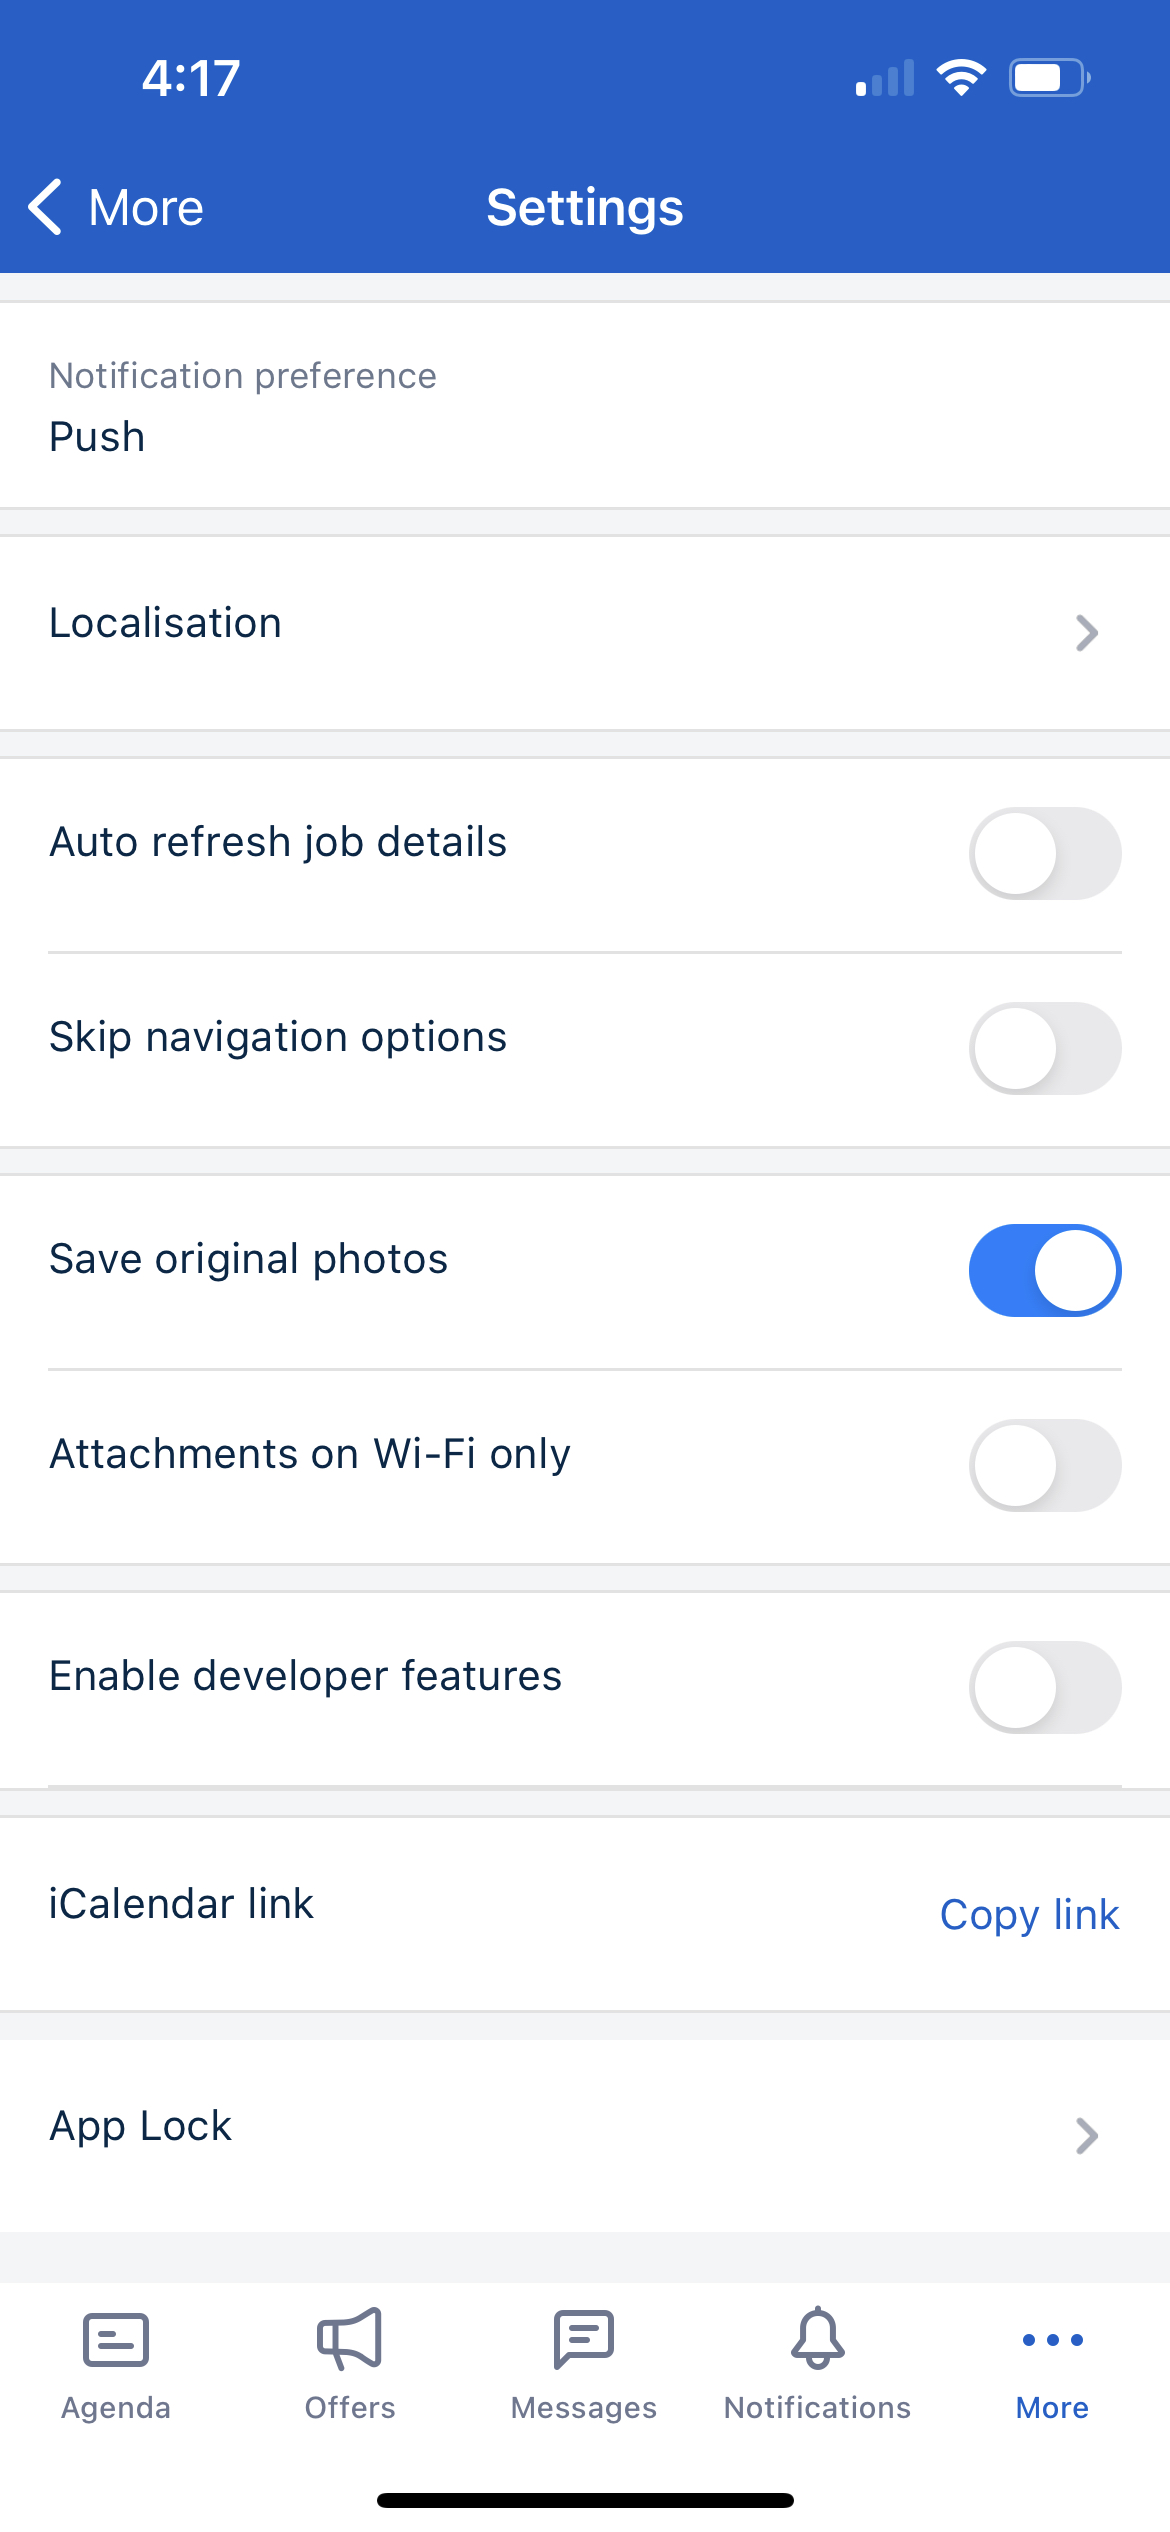 The Skedulo v2 mobile app settings screen with listed options.